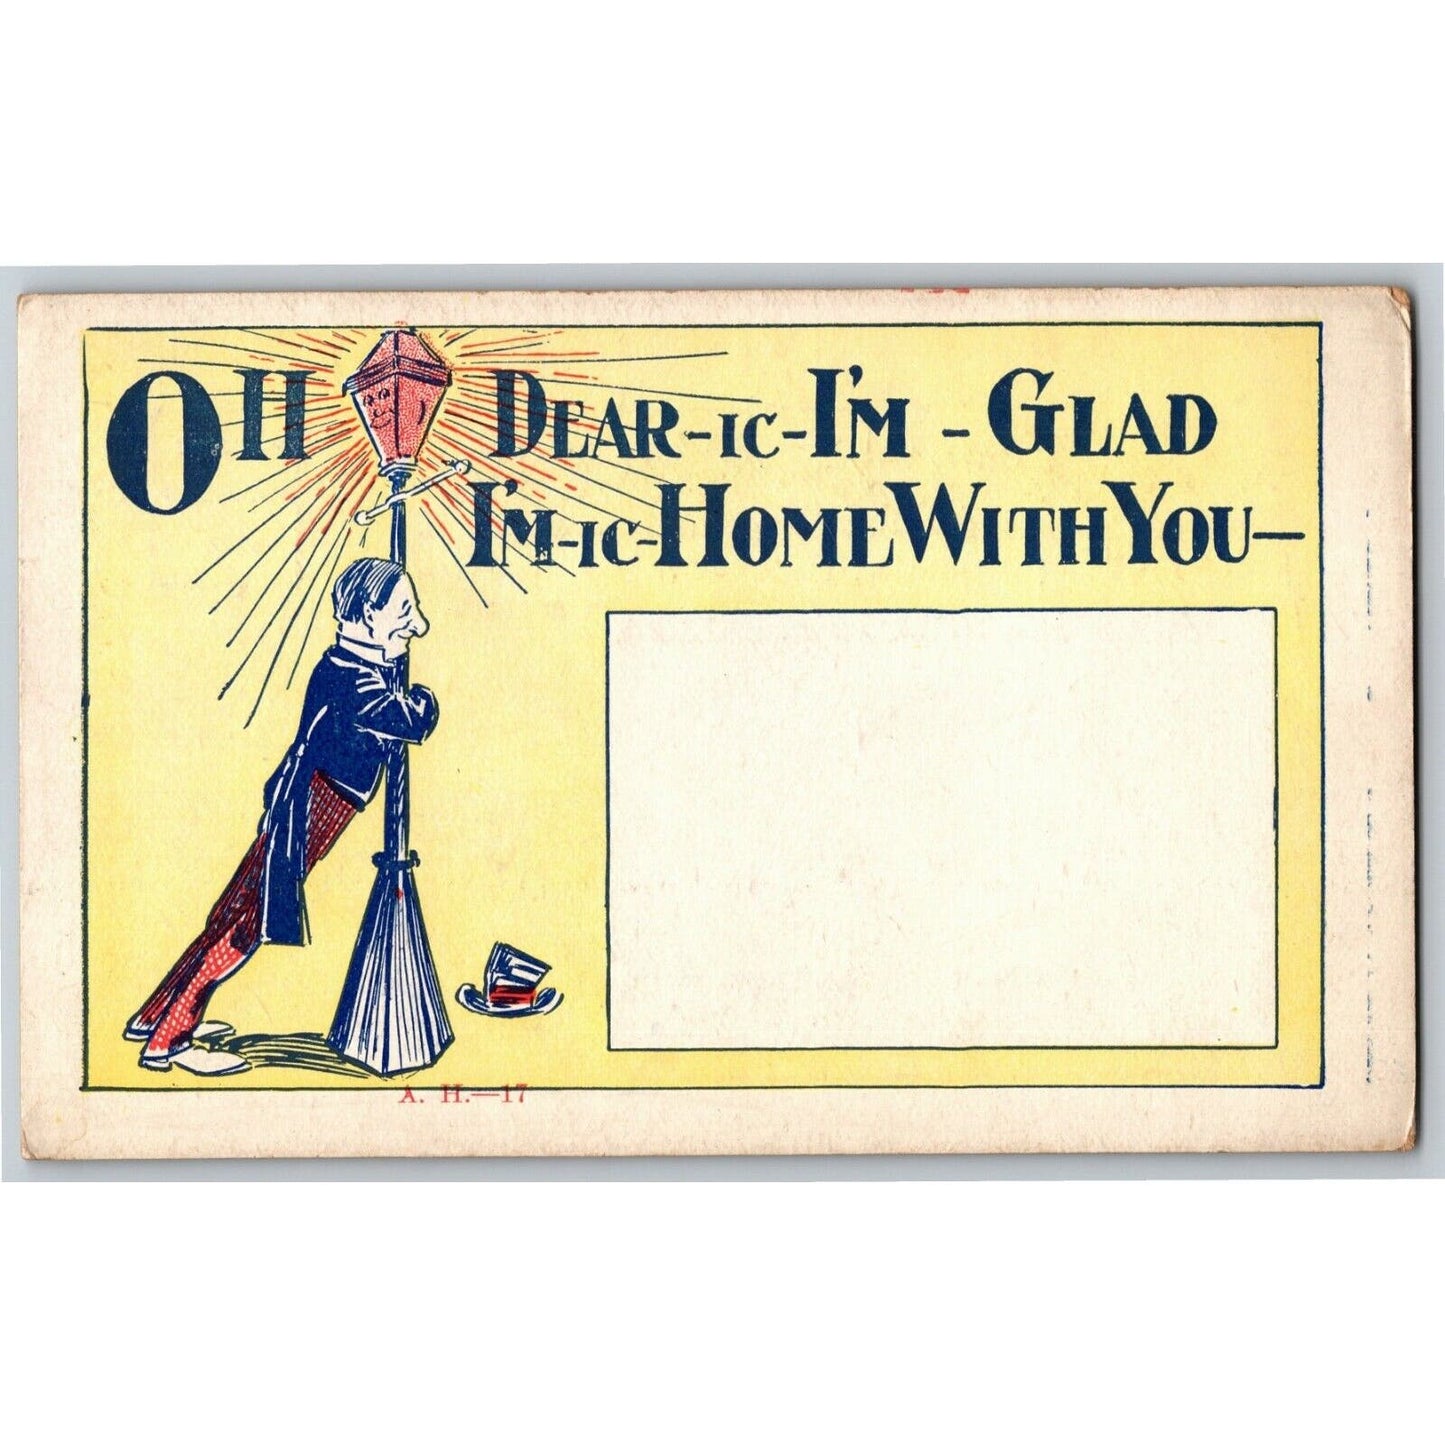 "..Home With You" c1905 Undivided Comic Public Drunk Light Post Humor Postcard